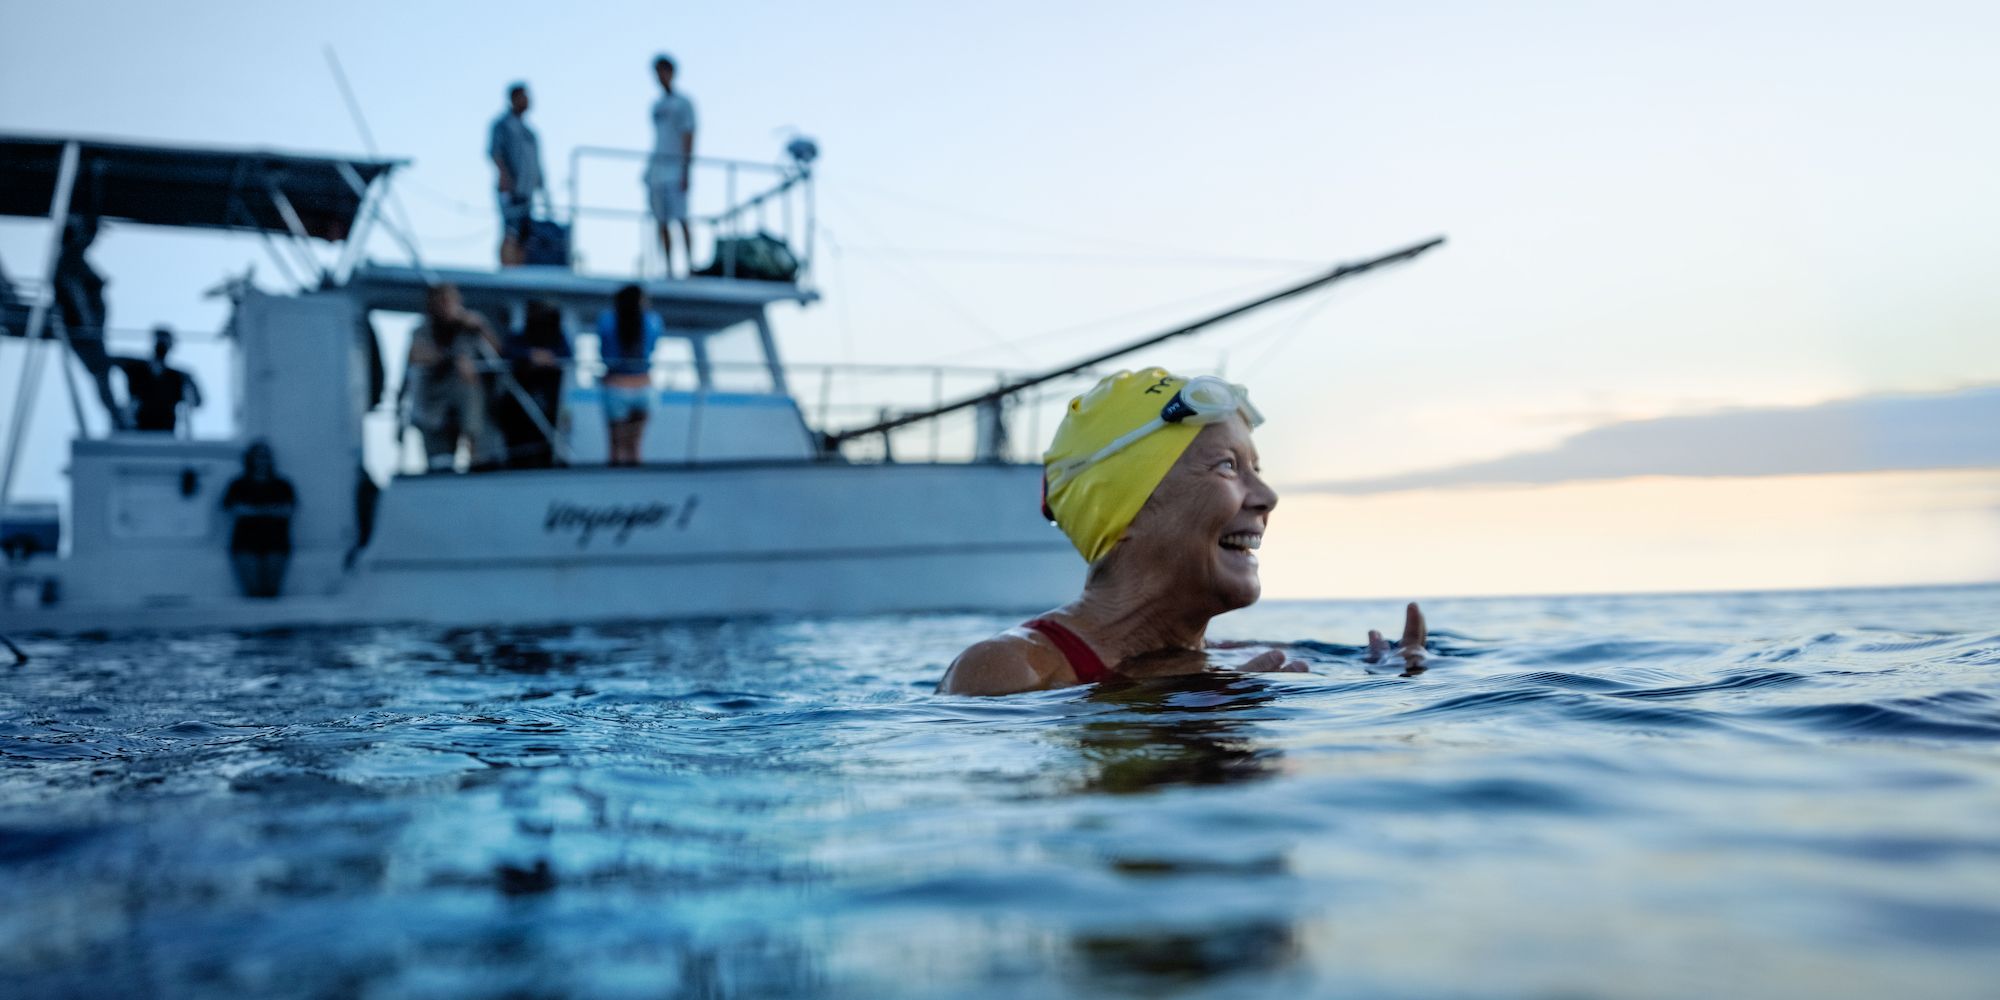 The True Story Of Diana Nyad & Her Swim From Cuba To Florida